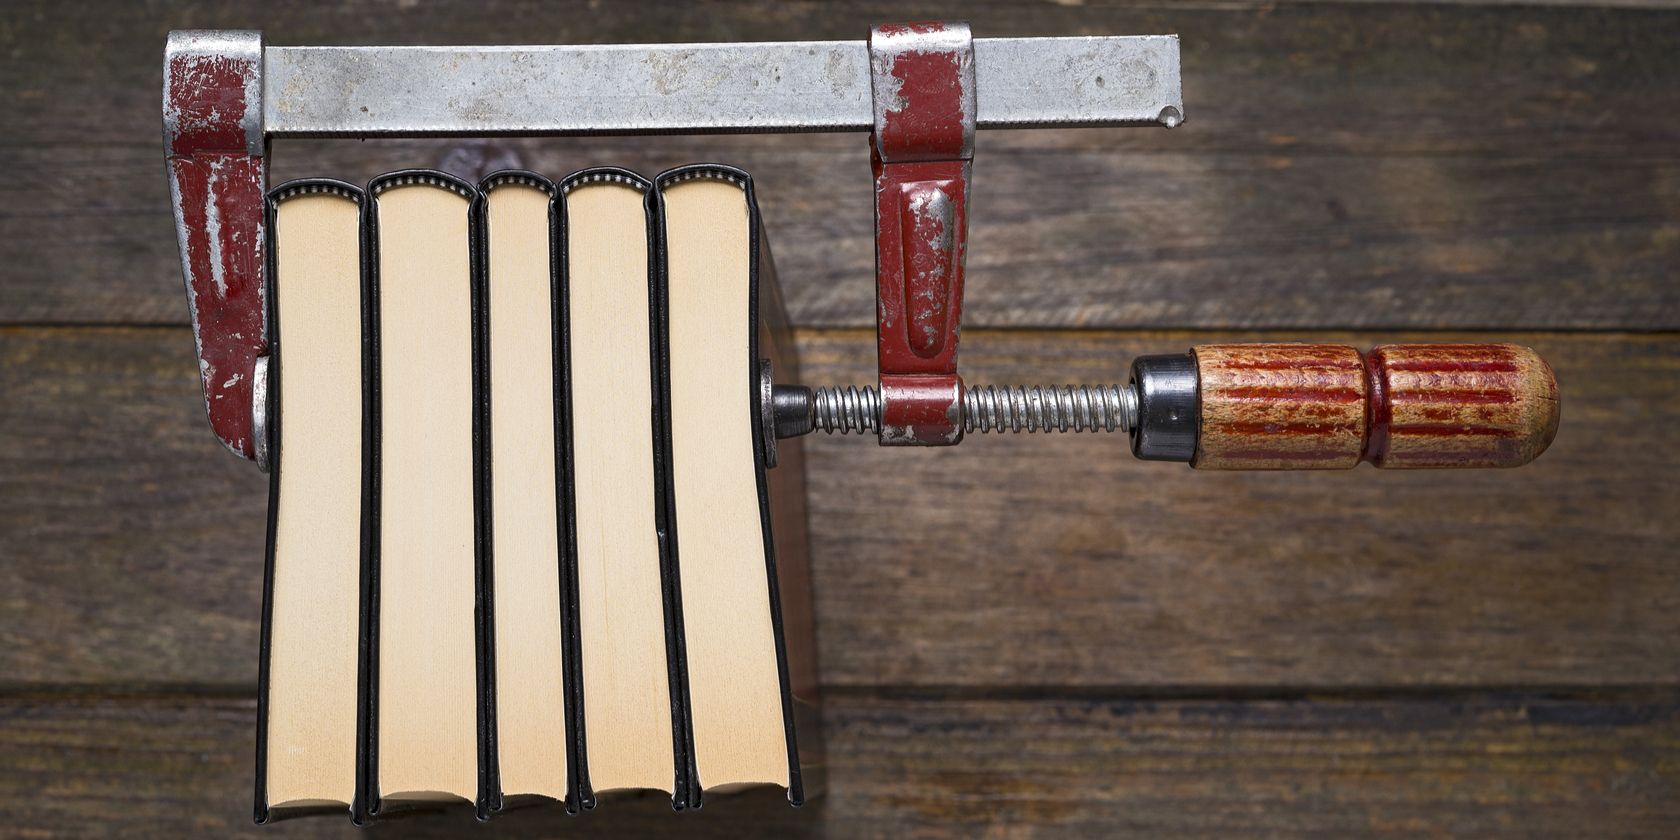 Clamp holding books together on a wooden table